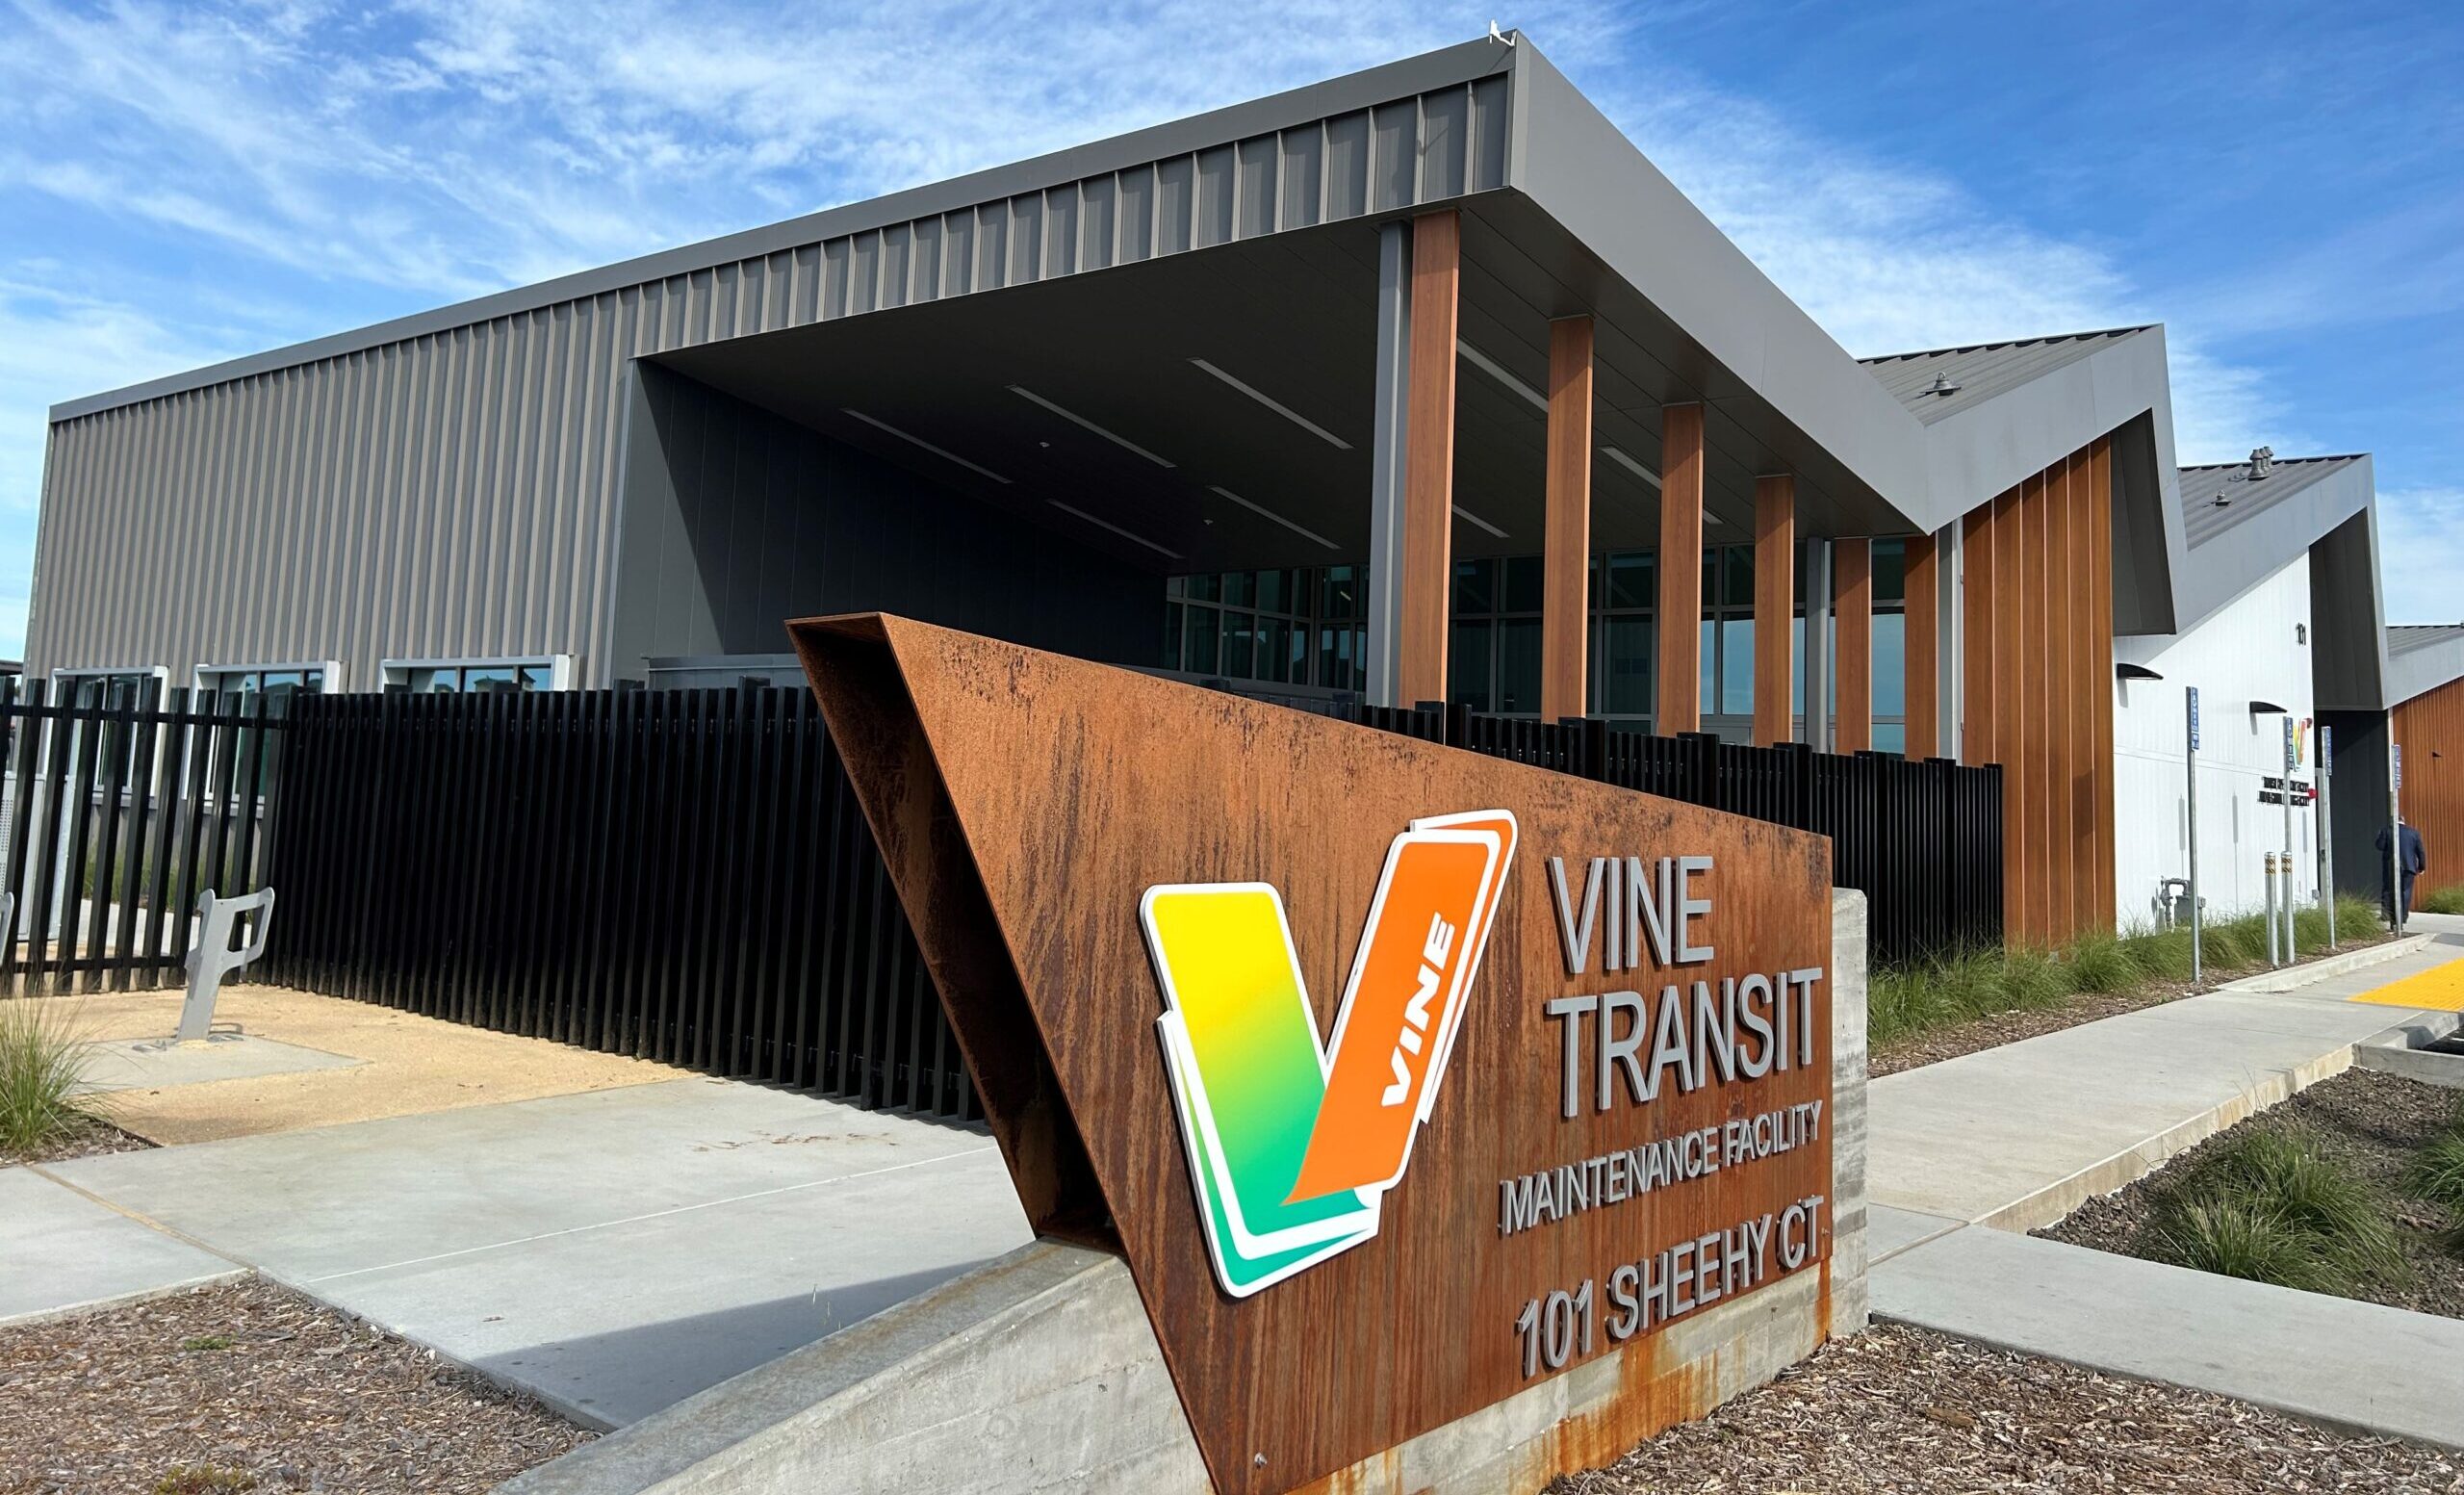 Grand opening of the Vine Transit Maintenance Facility